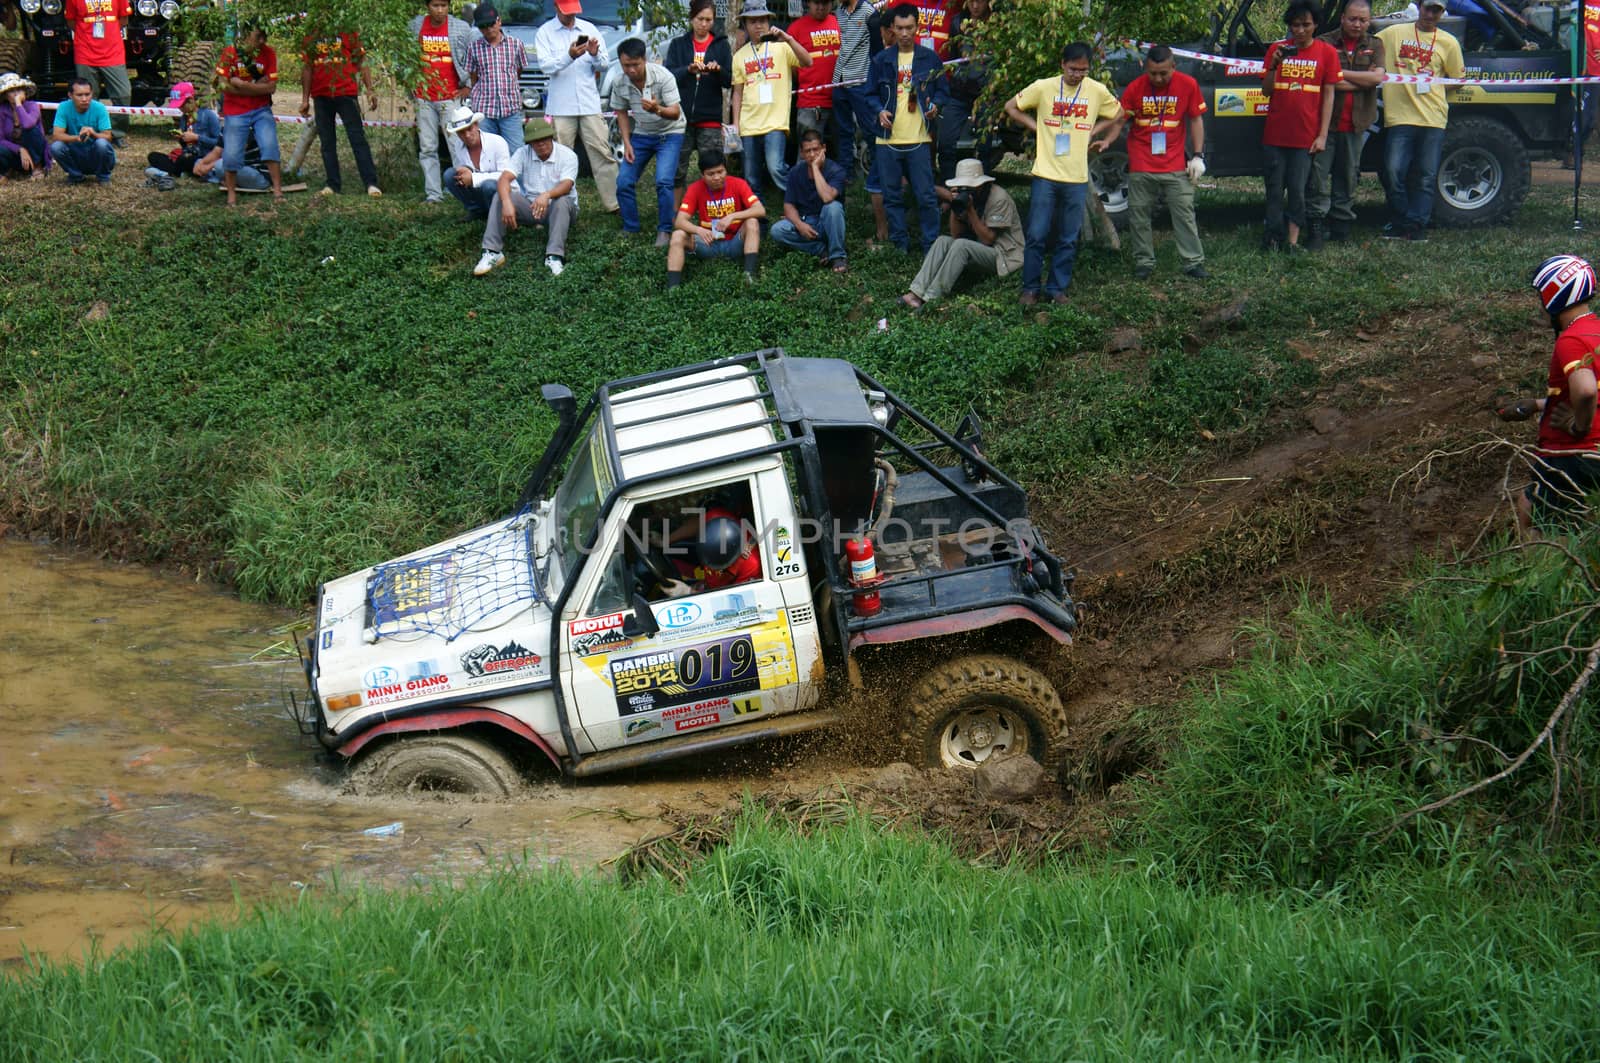 Racer offroad at terrain racing car competition by xuanhuongho